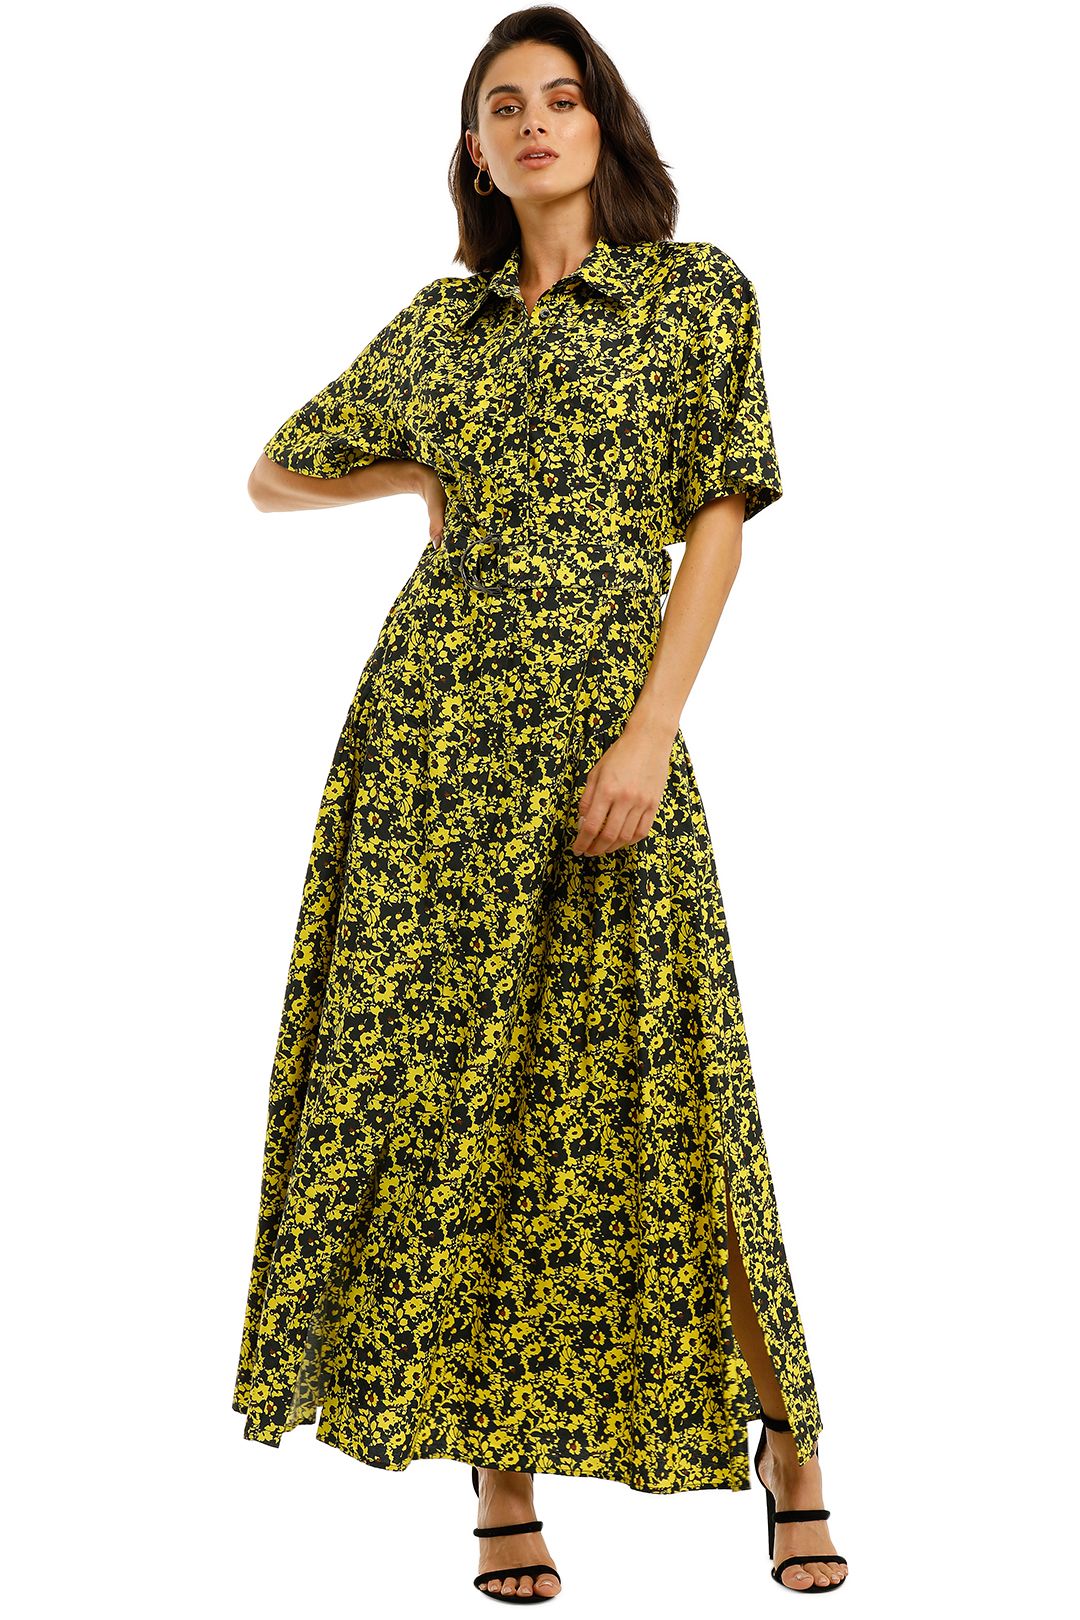 Camilla-and-Marc-Monet-Dress-Yellow-Front